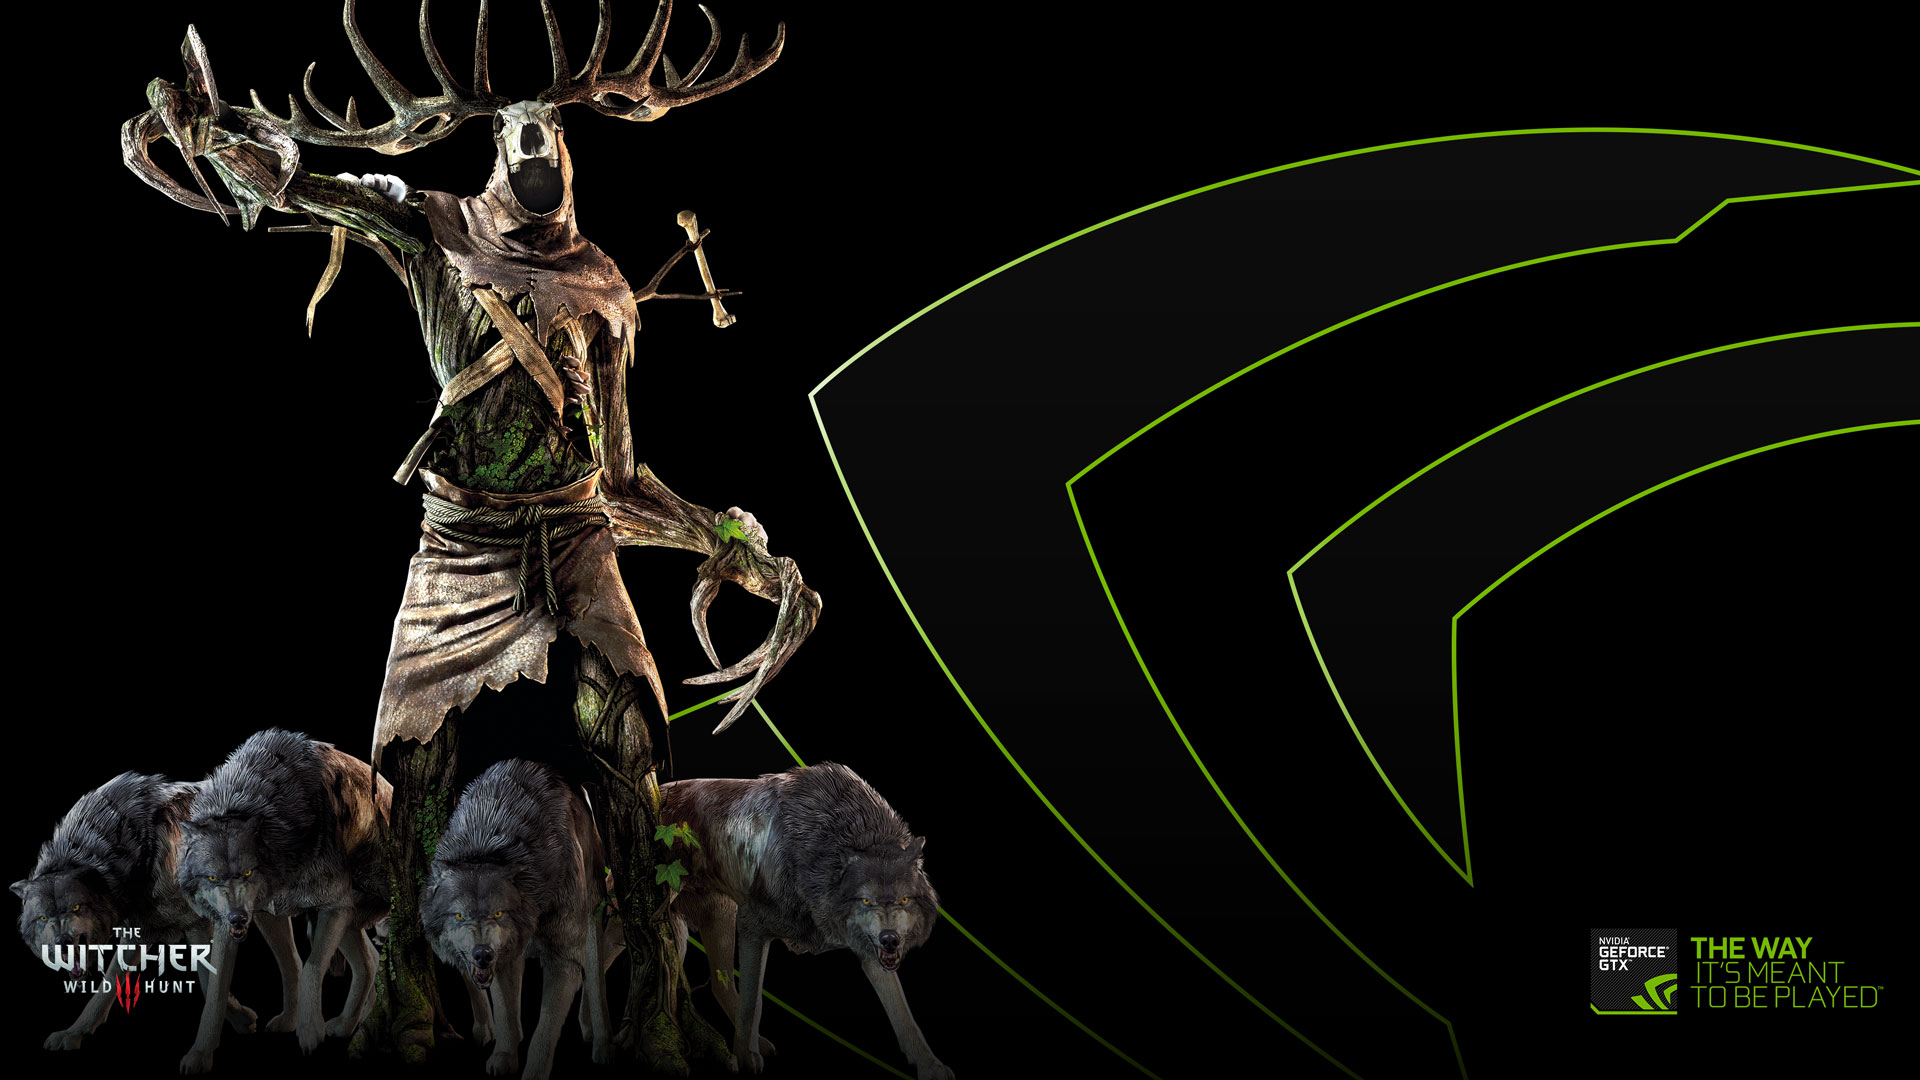 Free Geforce Wallpapers For Your Gaming Rig Nvidia